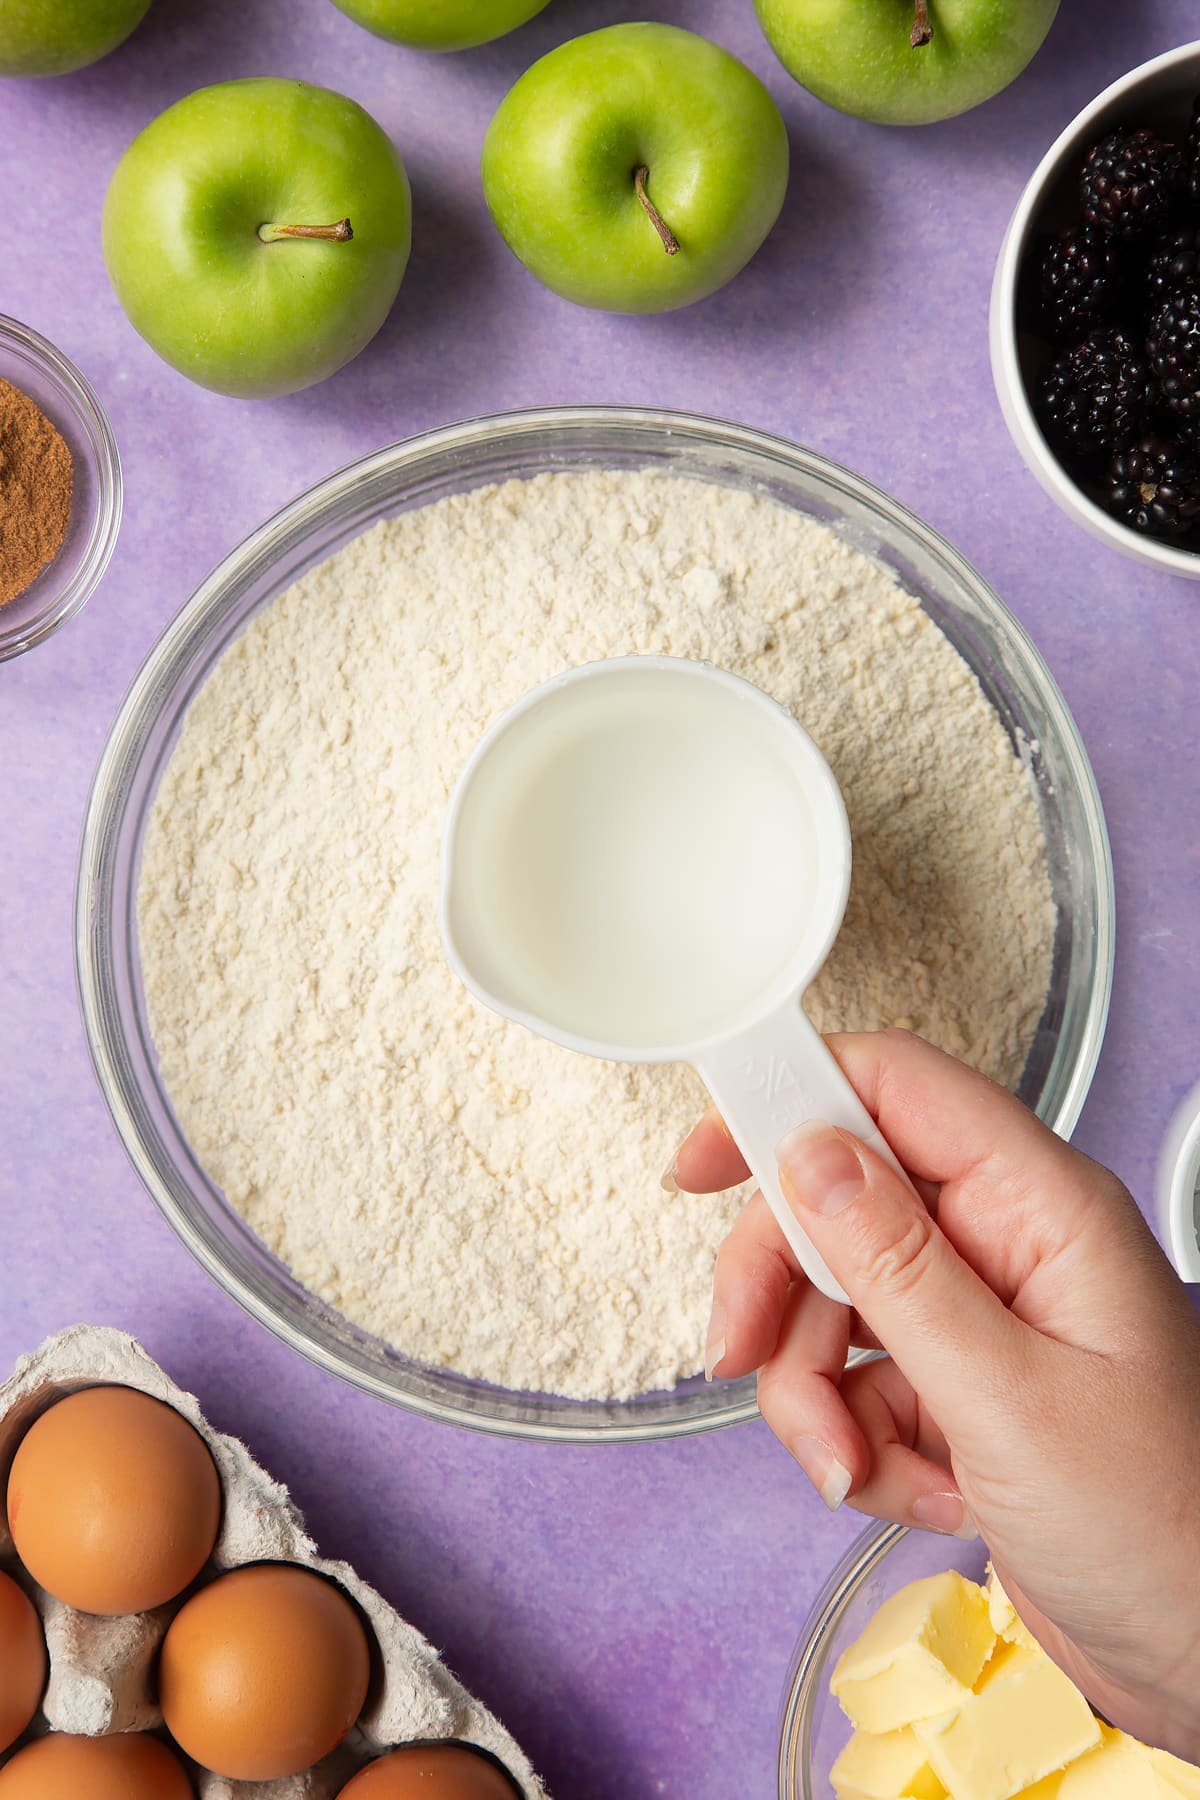 A flour and butter in a glass mixing bowl. A hand holds a cup of water above the bowl. Ingredients to make apple and blackberry pie surround the bowl.